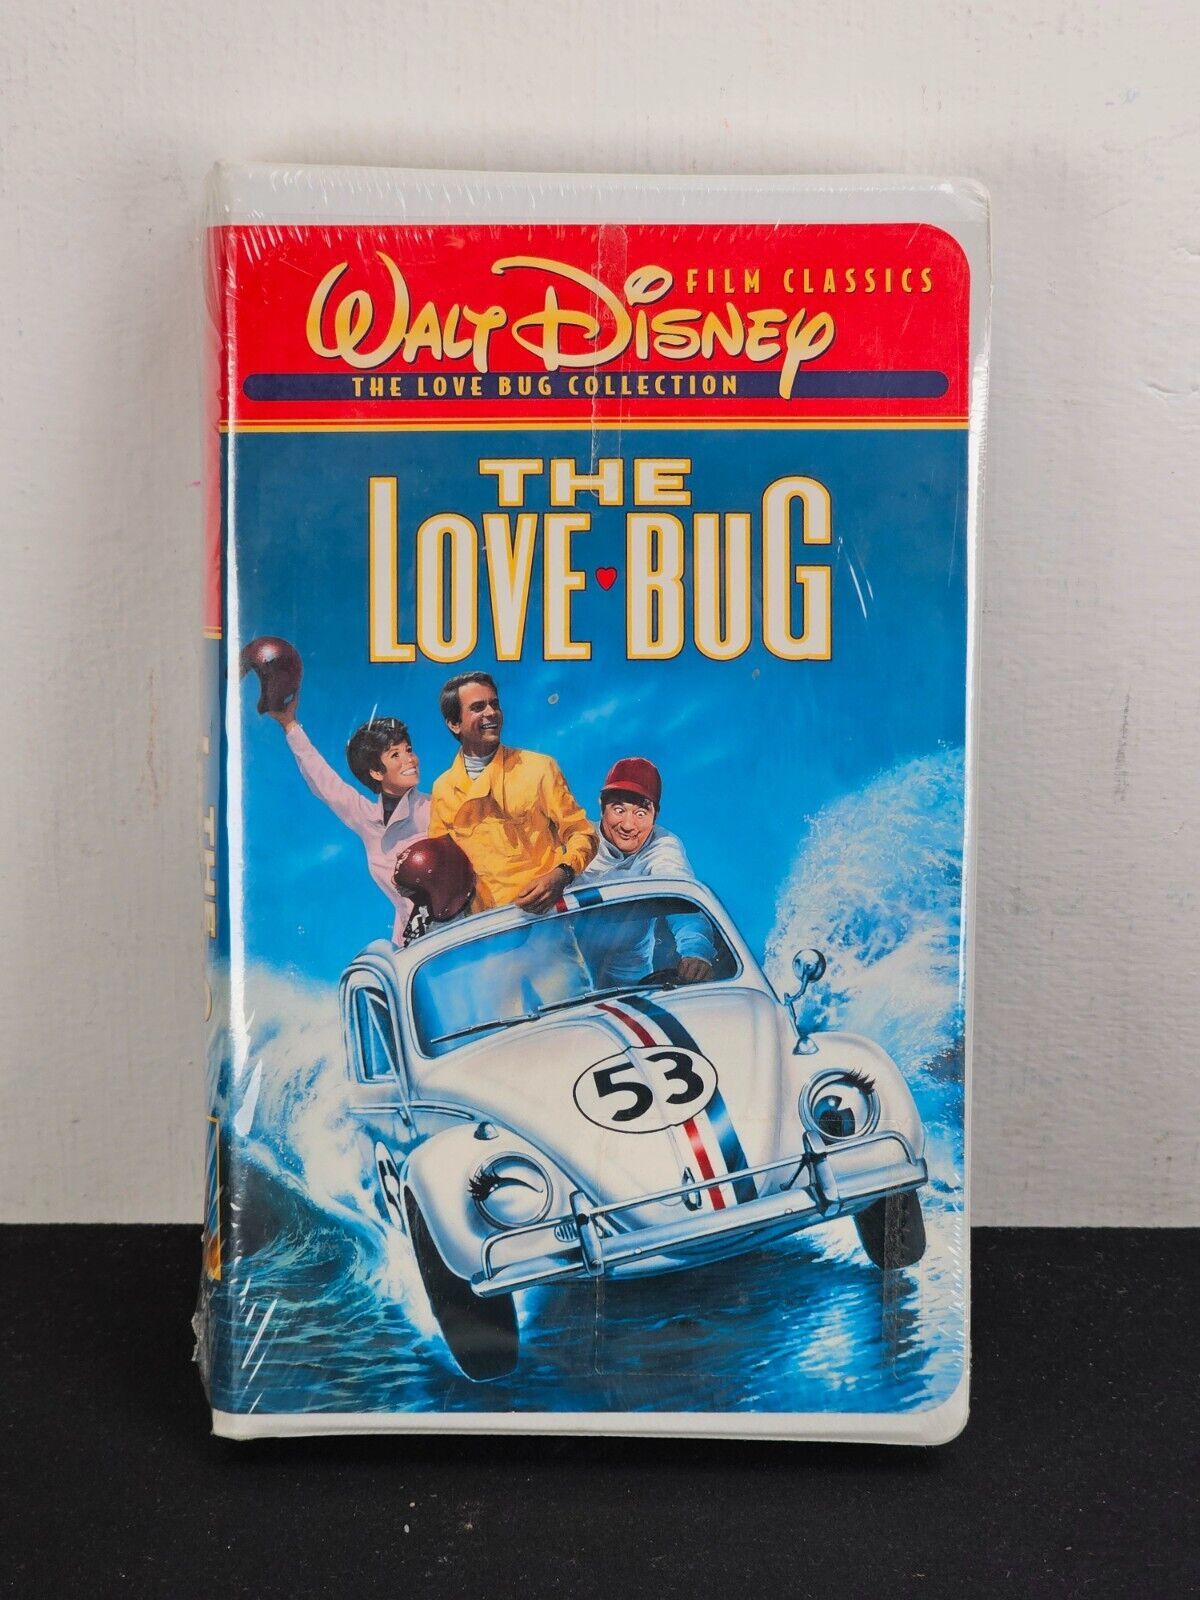 Primary image for Walt Disney Film Classics The Love Bug Collection The Love Bug VHS NEW SEALED